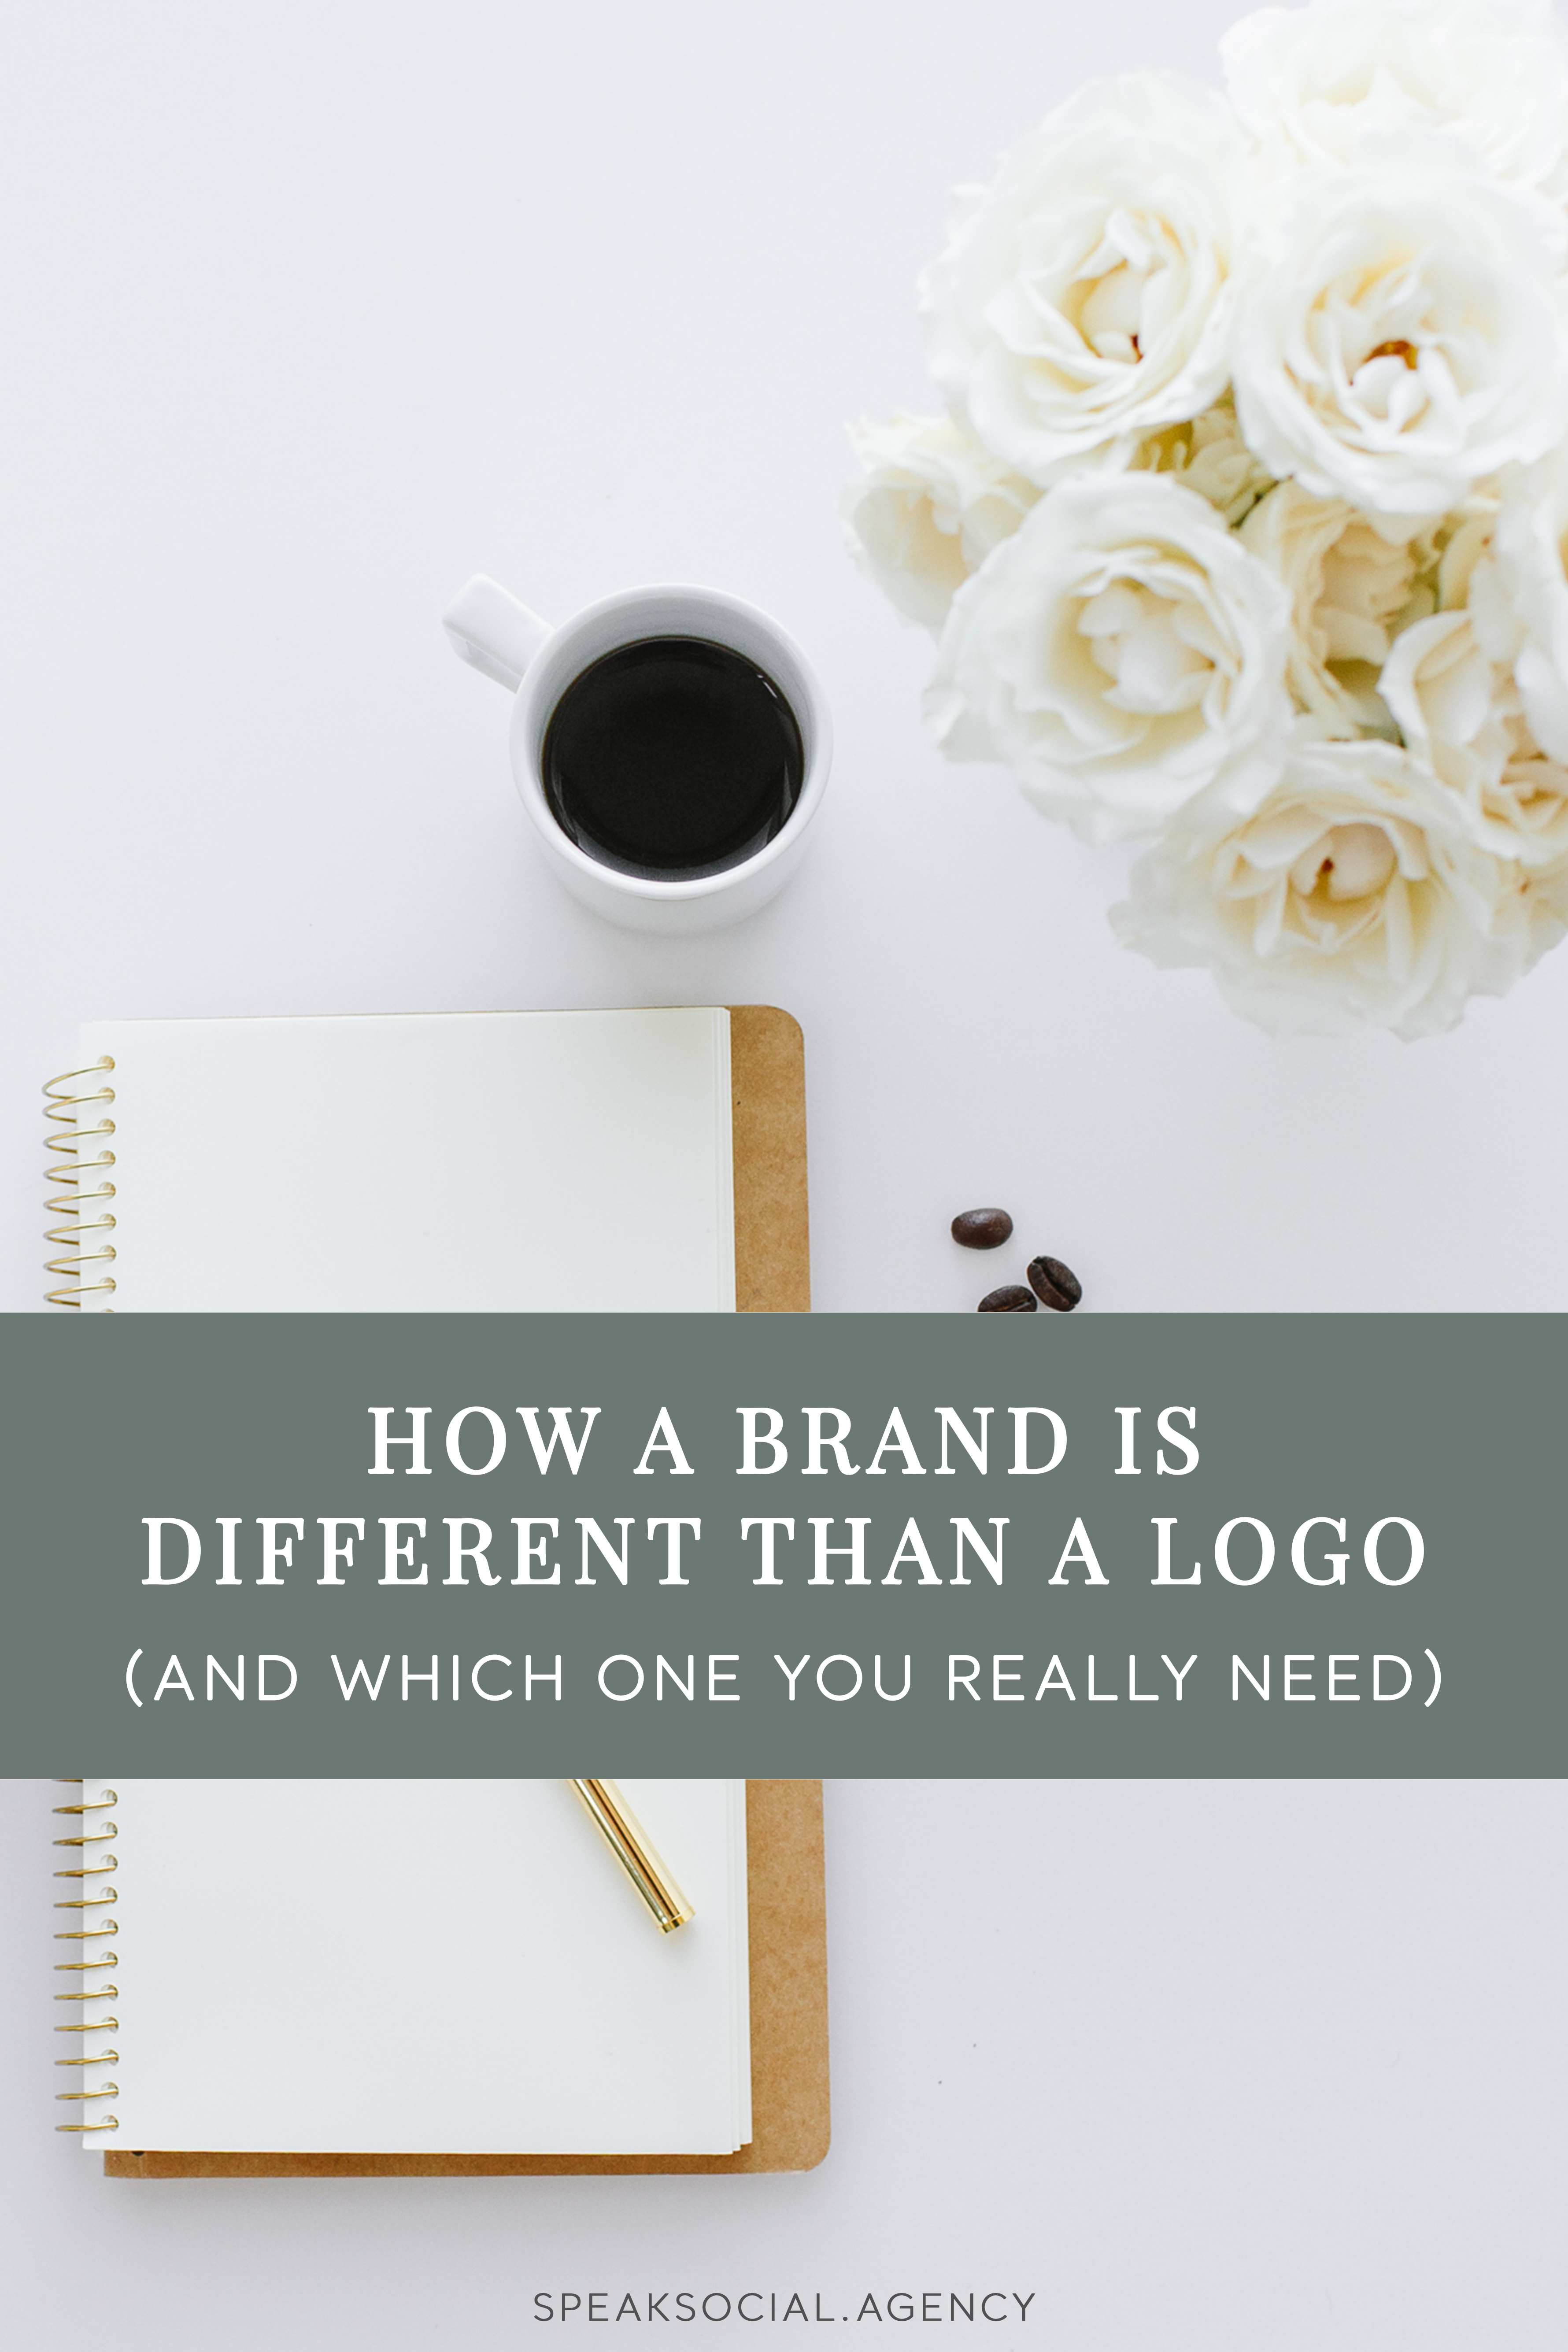 “Brand” and “logo” are often used interchangeably, however they mean different things and it’s important to know the difference when looking to update your overall business look.